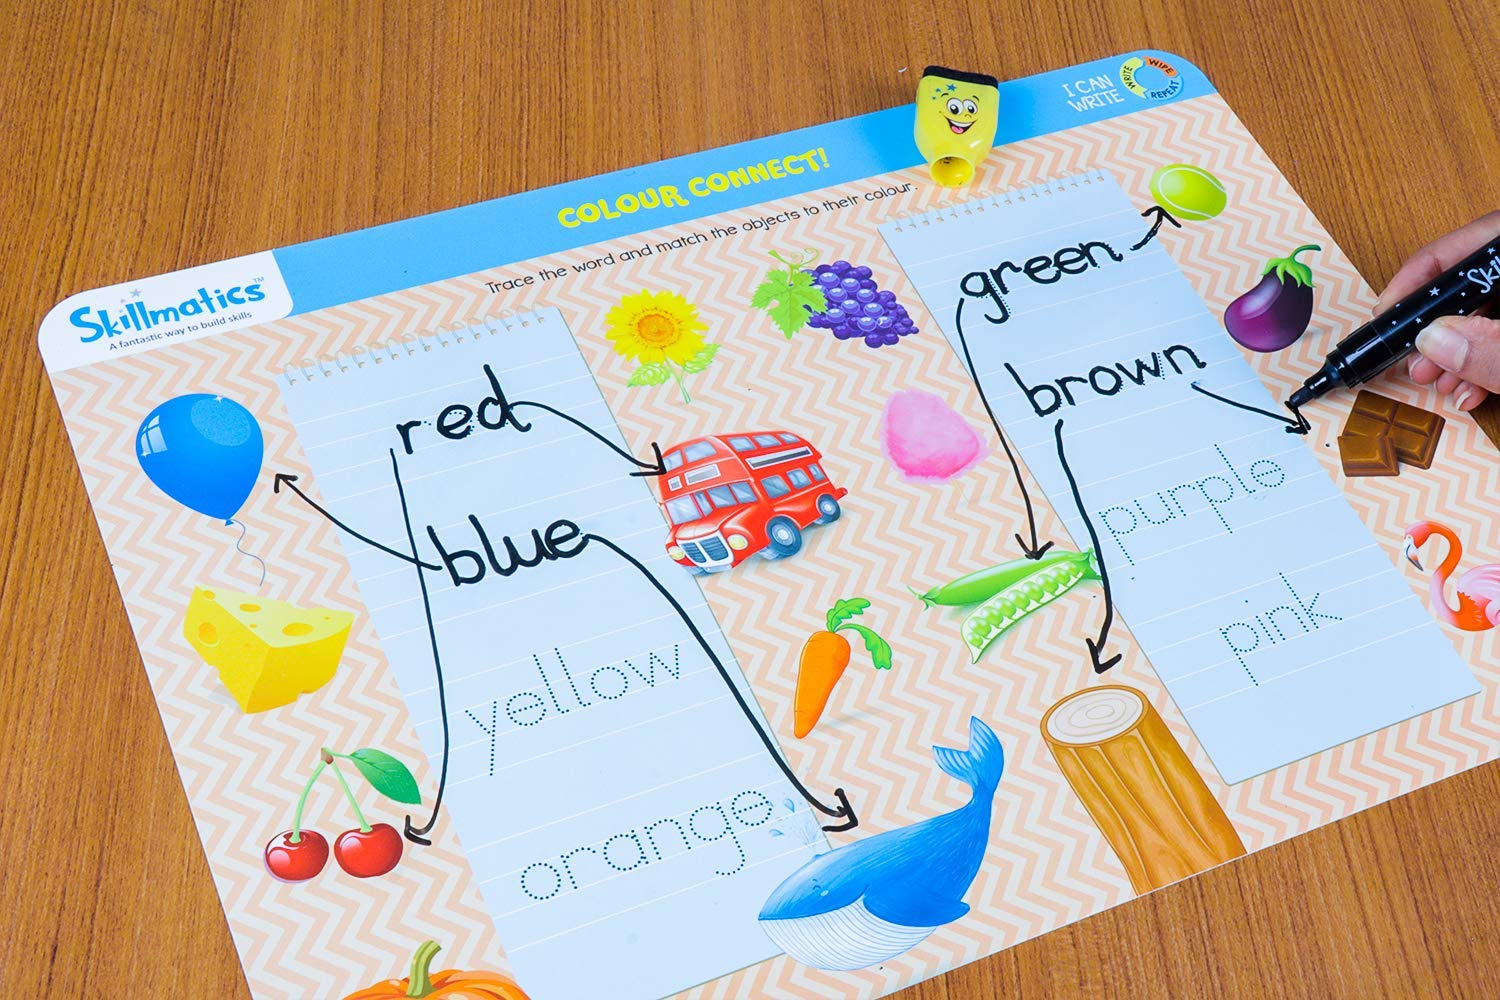 Skillmatics Educational Game : I Can Write | Reusable Activity Mats with 2 Dry Erase Markers | Gifts & Preschool Learning for Ages 3-6